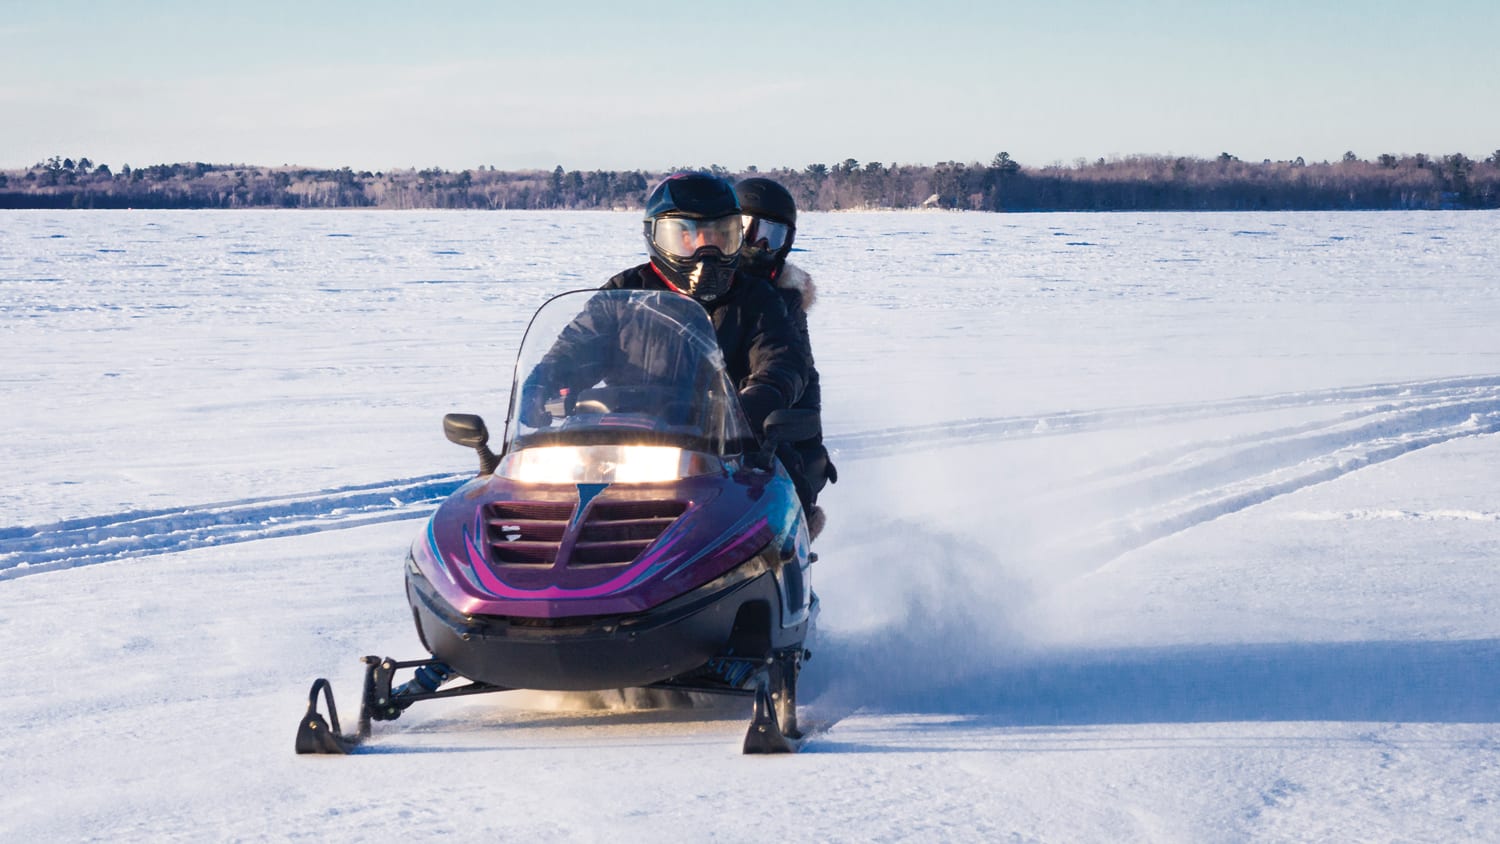 two people riding a snowmobile on snowy plain in Yellowknife